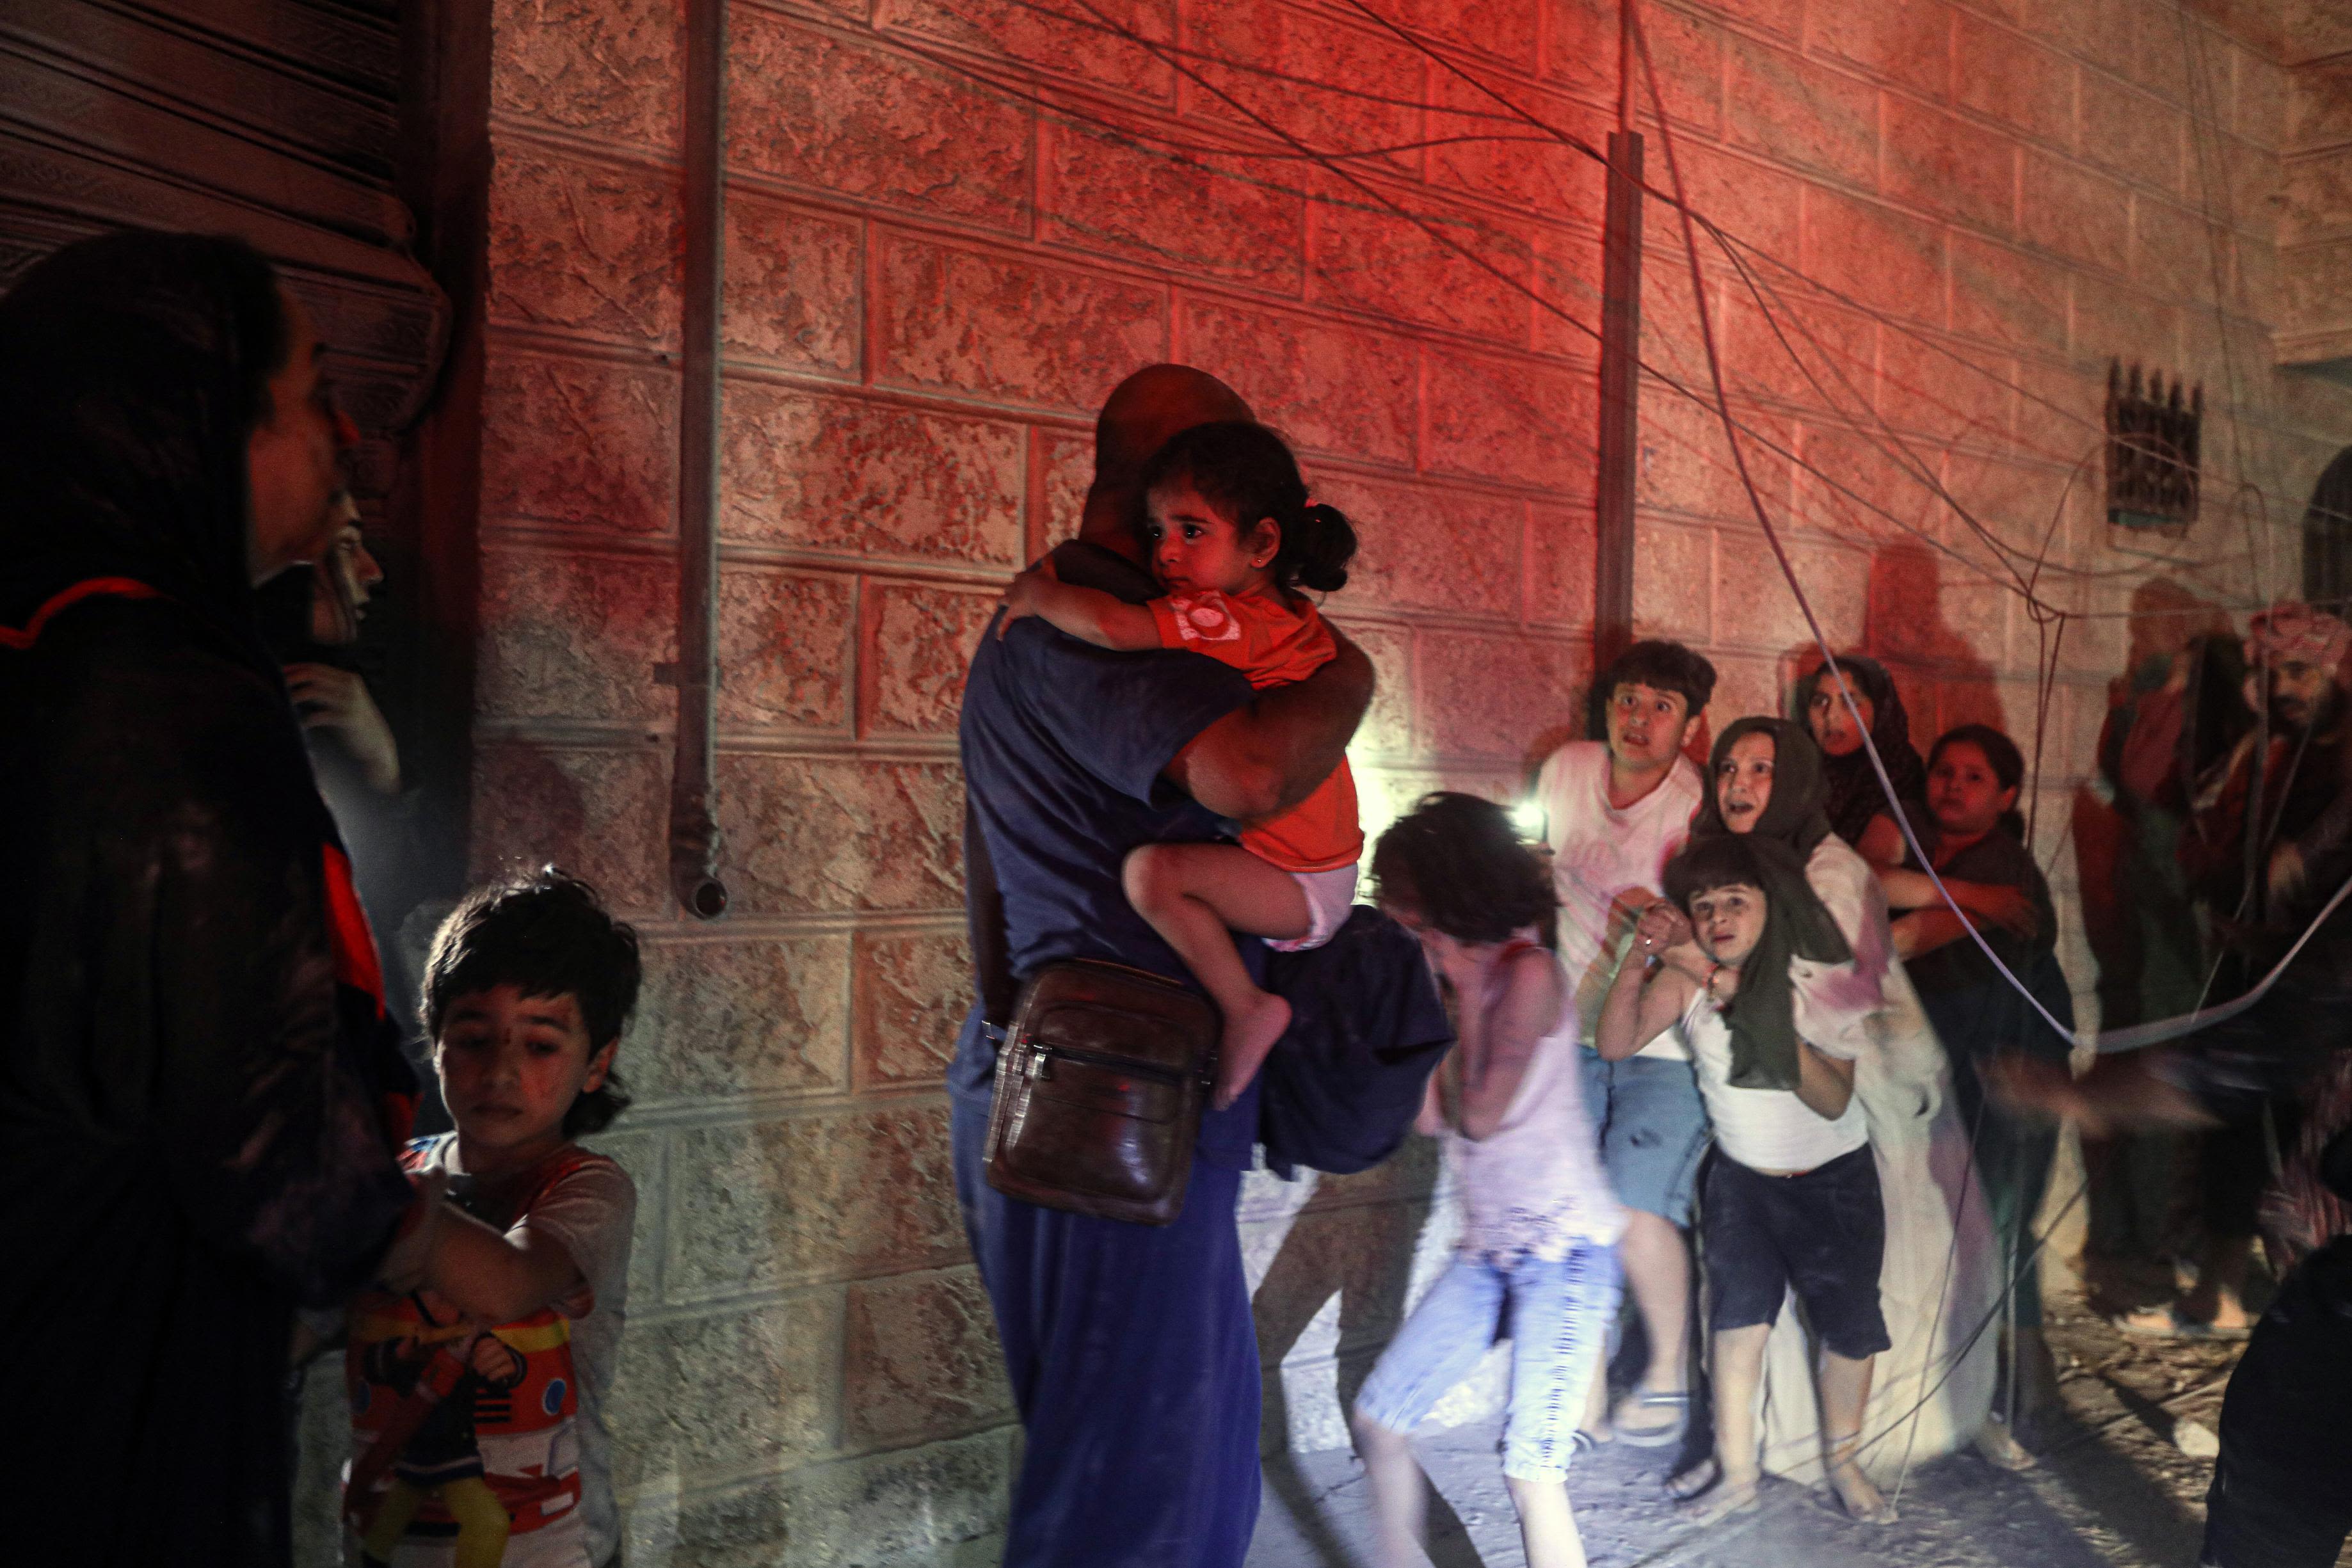 Palestinians seek shelter in Khan Younis, Gaza, after a house next door was hit by an Israeli airstrike on October 12.